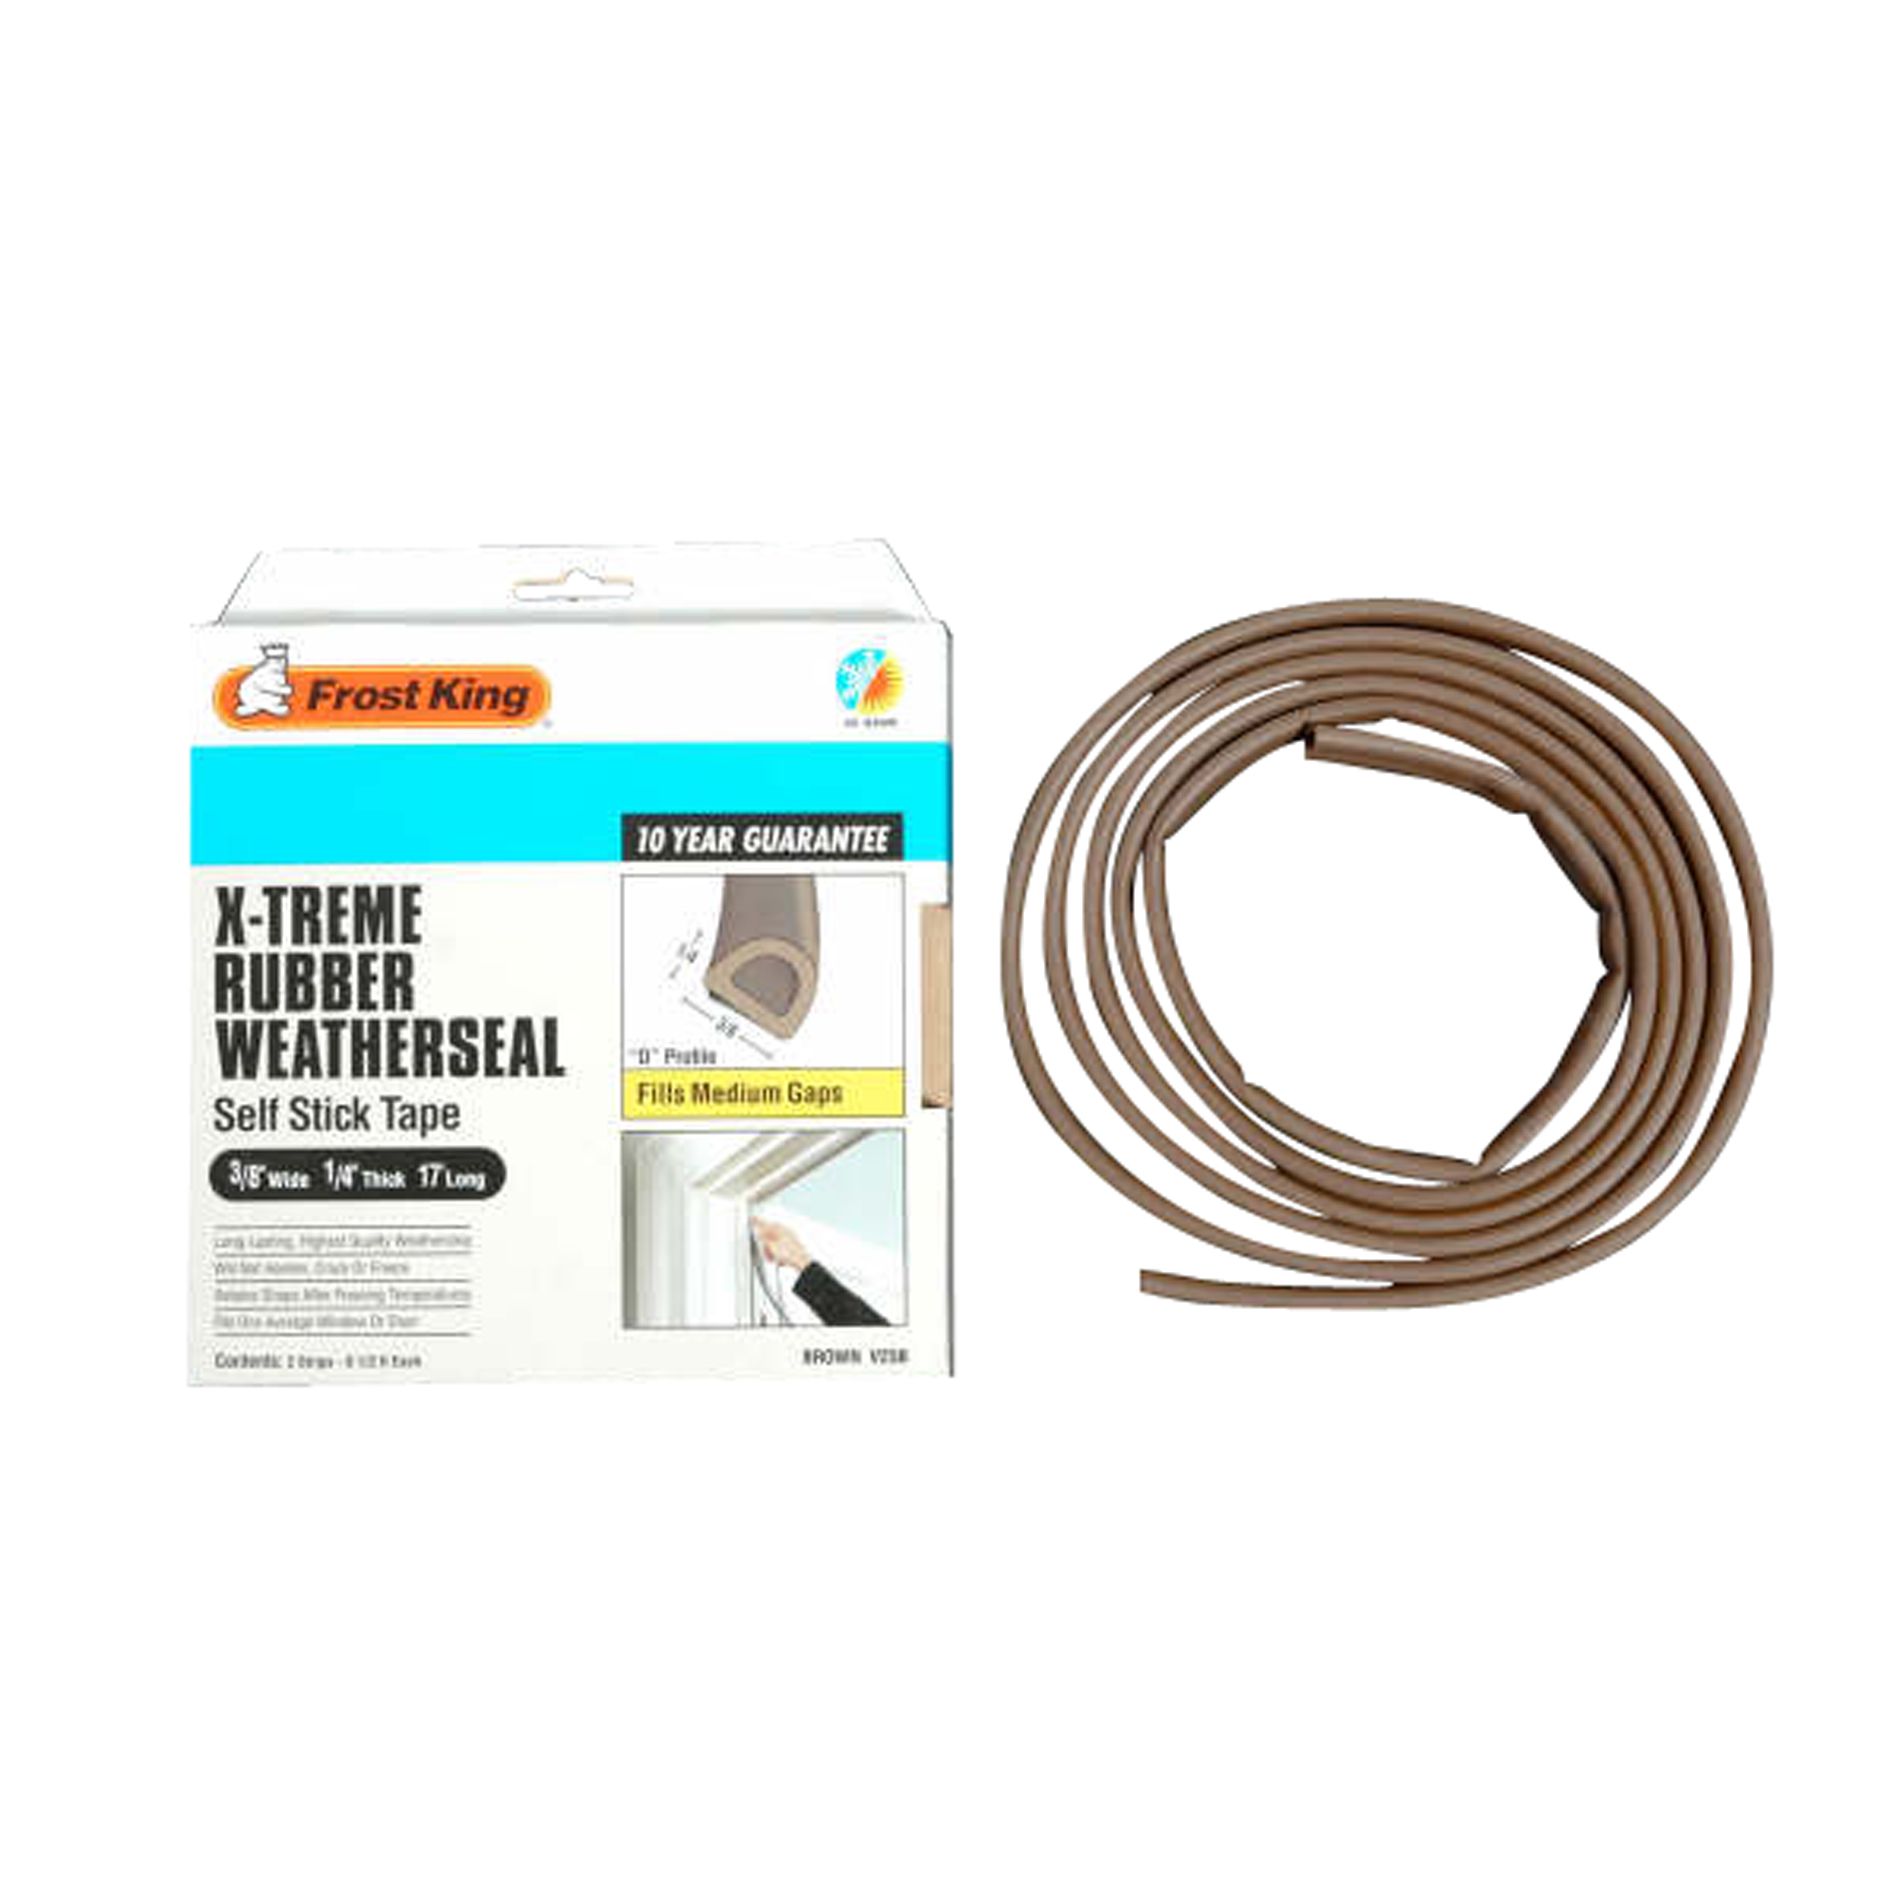 Frost King EPDM Rubber Weatherstrip Tape, 3/8 in. x 17 ft. - Brown